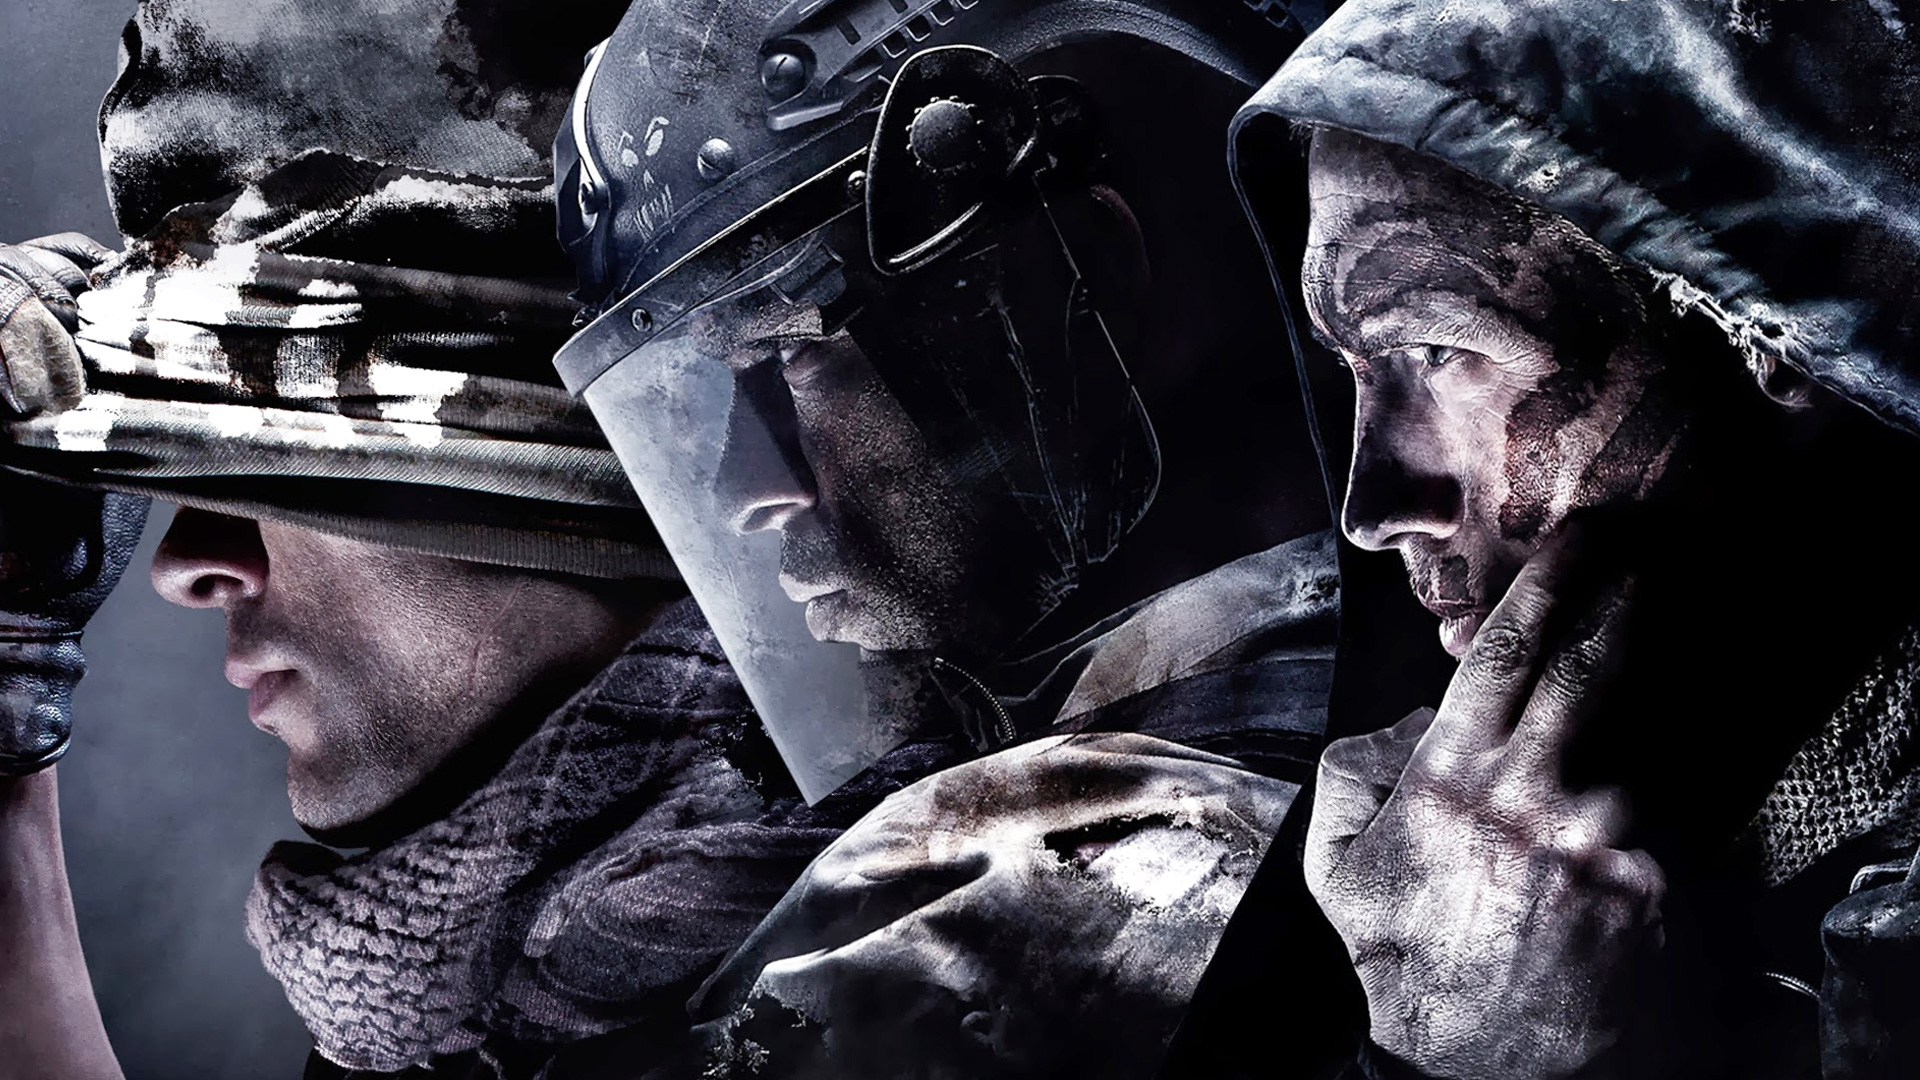 stick call of duty ghosts wallpaper